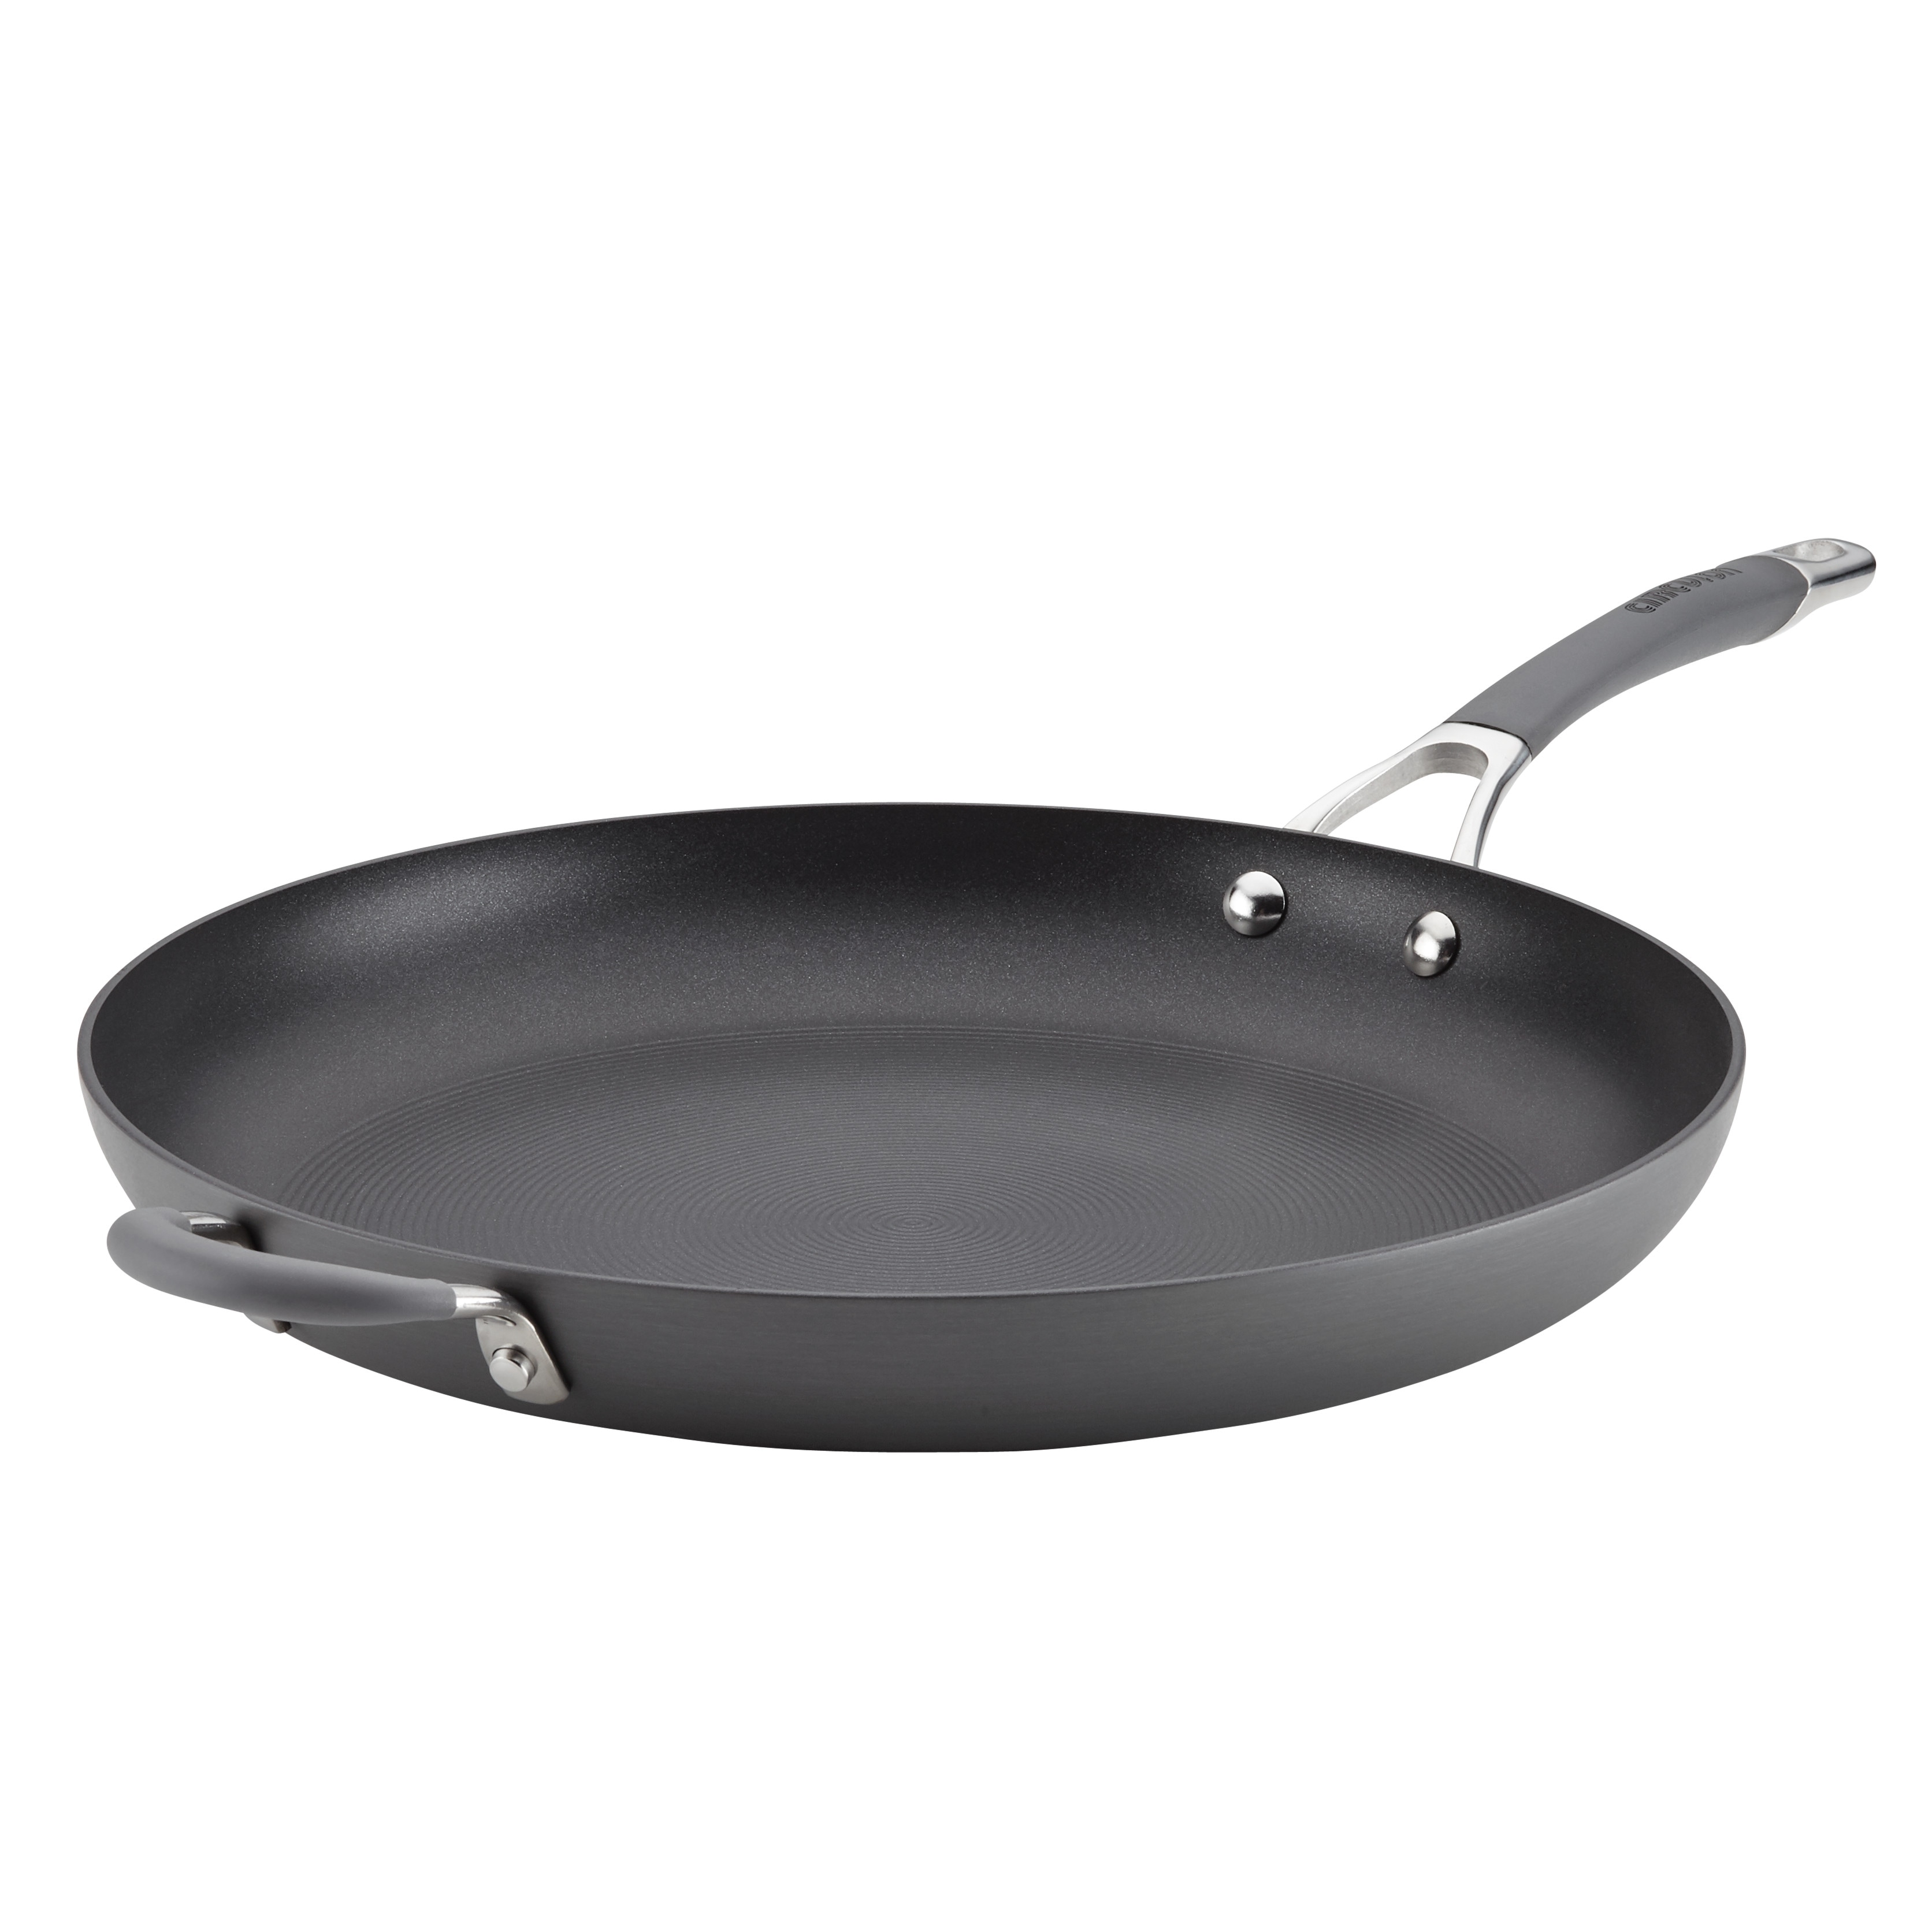 https://ak1.ostkcdn.com/images/products/is/images/direct/68a4b40f00ce7da5acbb83a069f2ae6c470adde7/Circulon-Radiance-Hard-Anodized-Nonstick-Frying-Pan-with-Helper-Handle%2C-14-Inch%2C-Gray.jpg